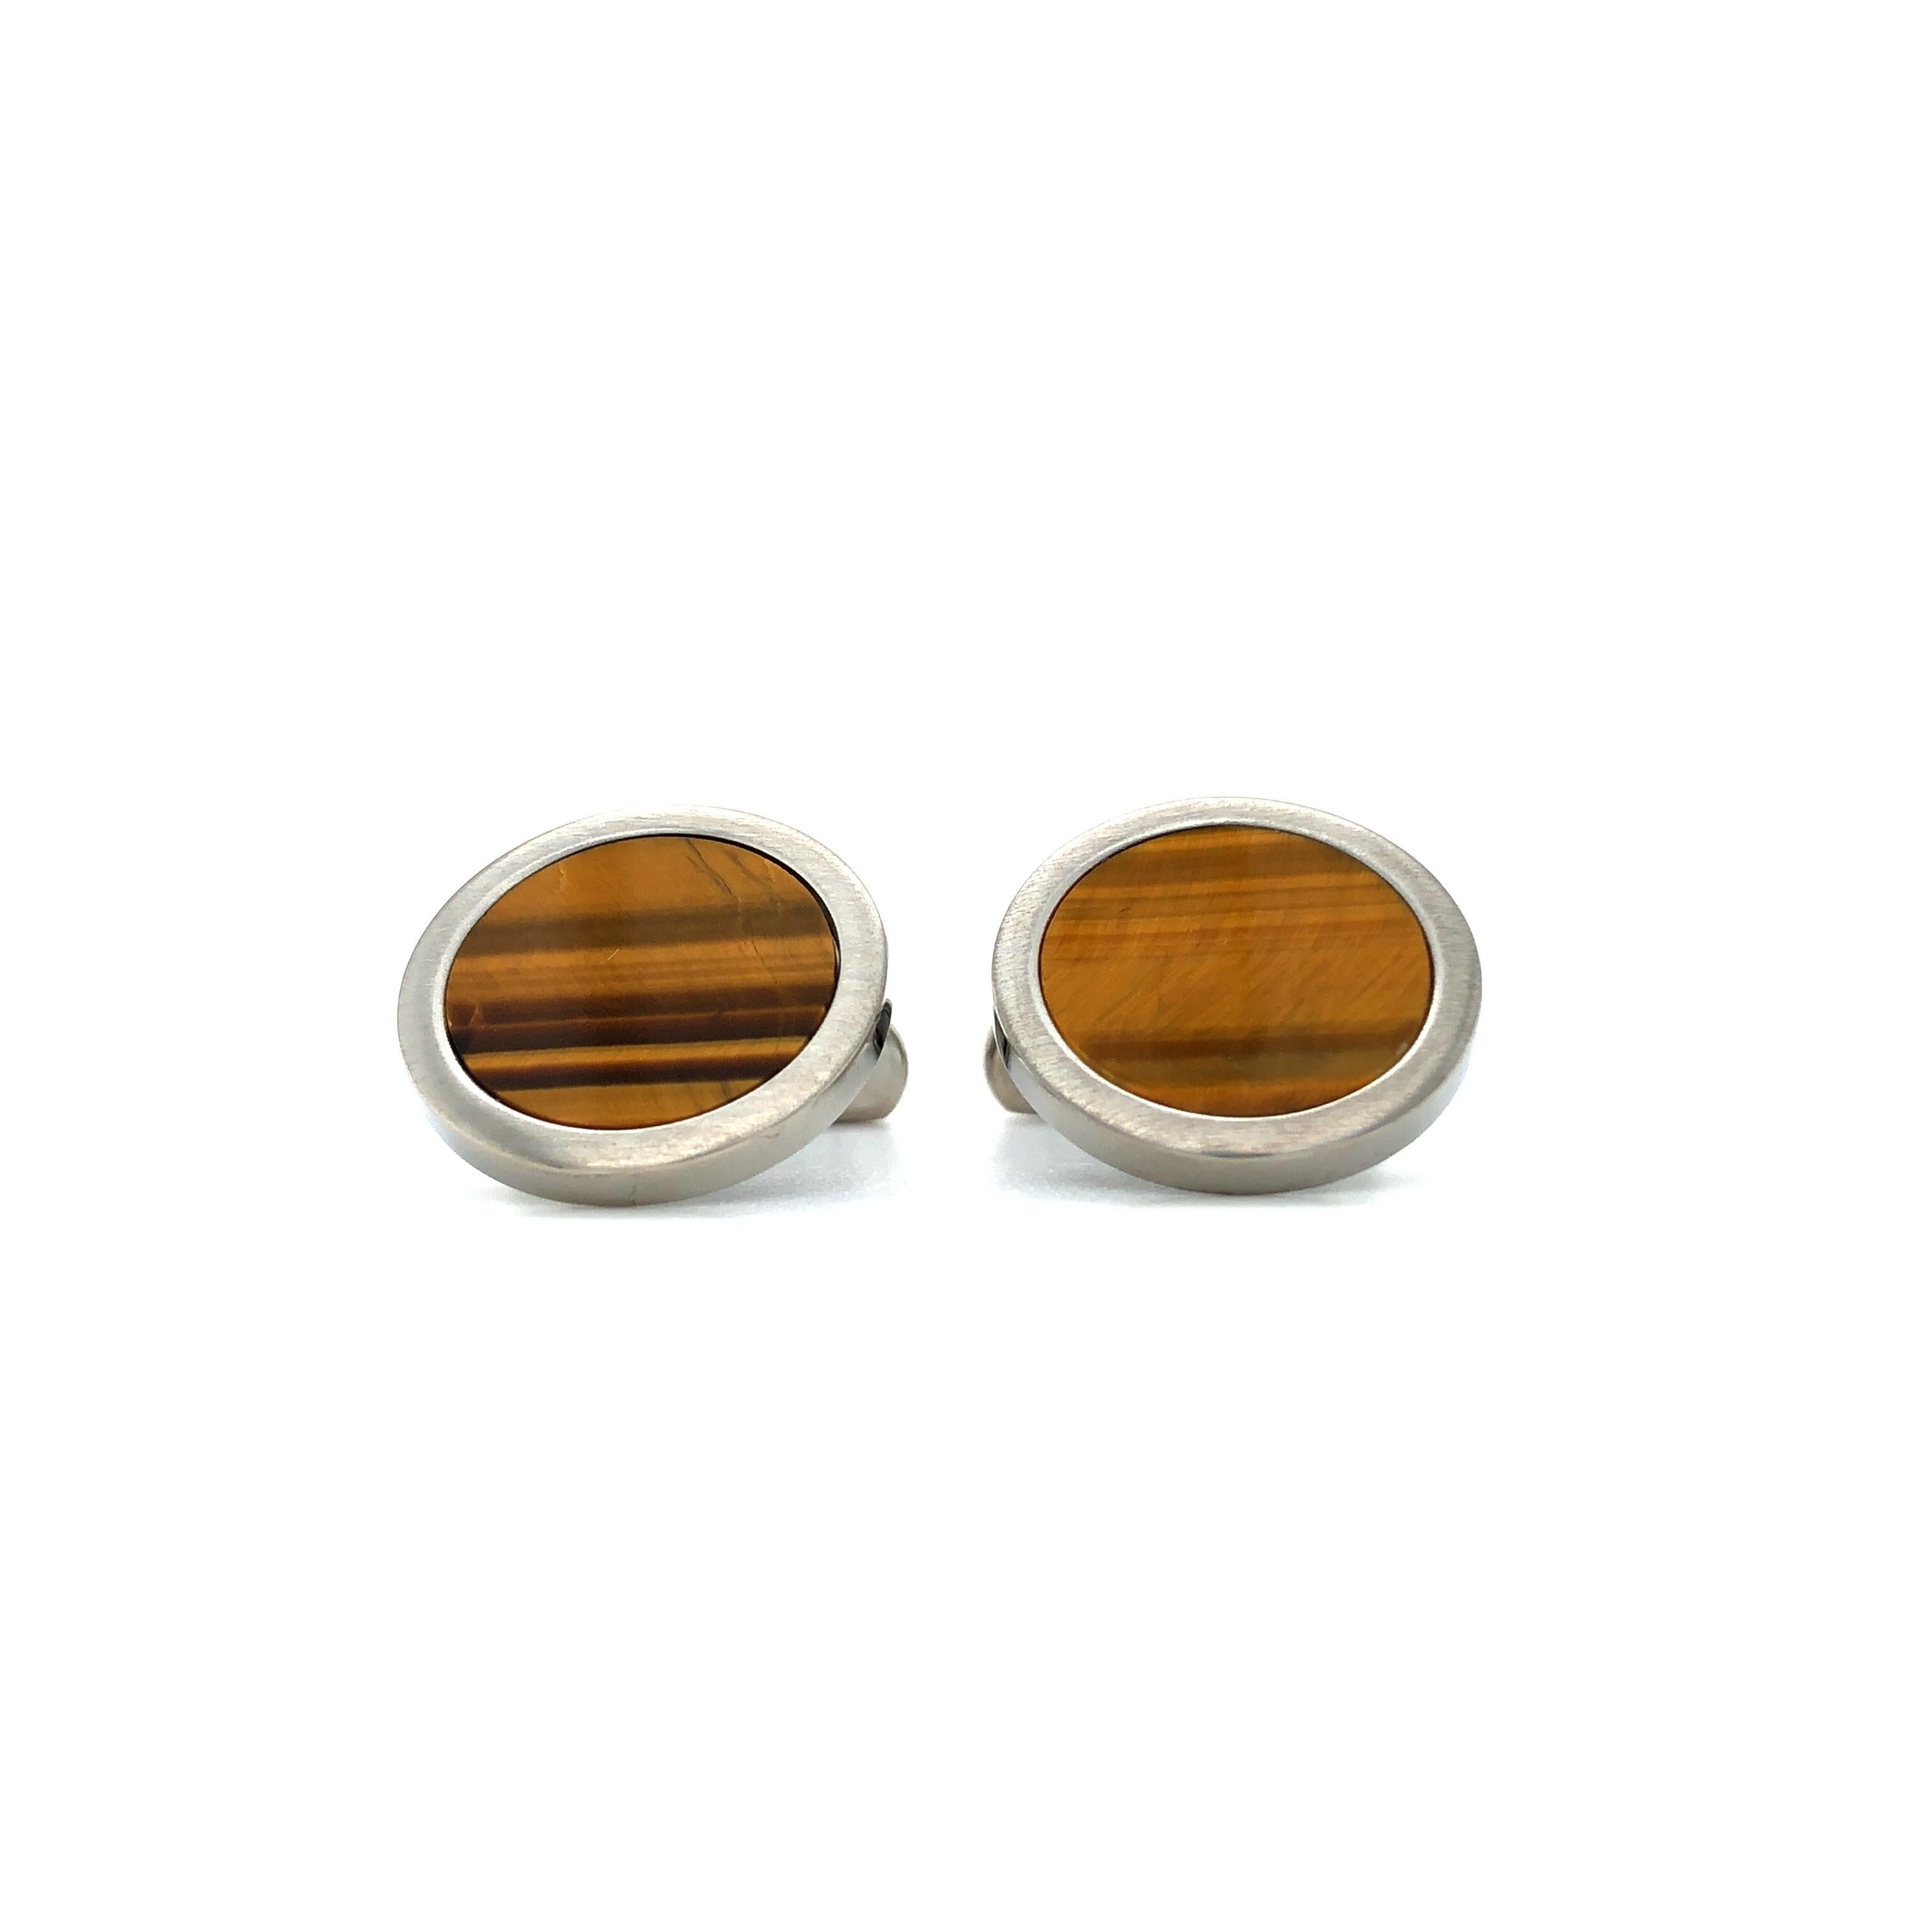 Round Cufflinks, Hallmark Collection by Victor Mayer, Stainless Steel, Tiger Eye Gemstone Inlay, Diameter 19 mm

About the creator Victor Mayer
Victor Mayer is internationally renowned for elegant timeless designs and unrivalled expertise in